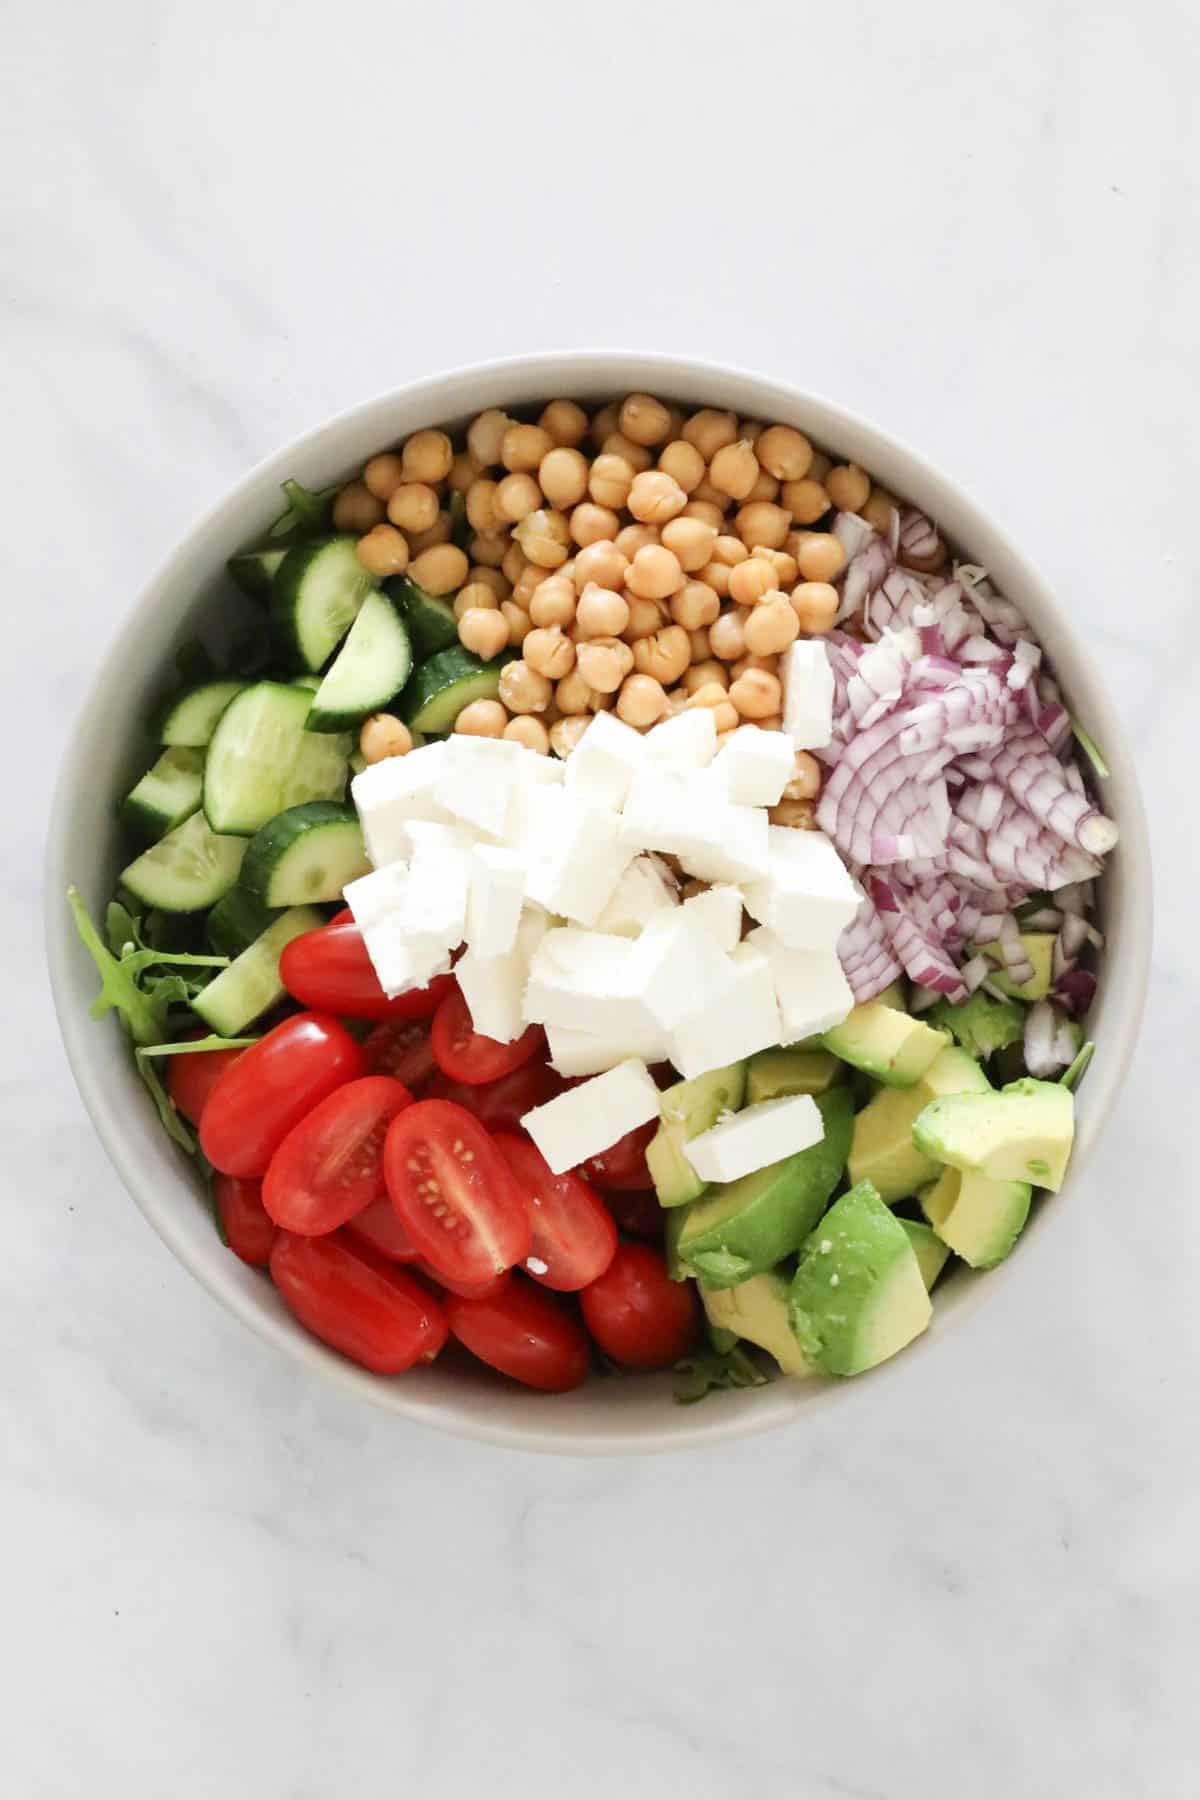 The chickpea salad ingredients placed in a mixing bowl.